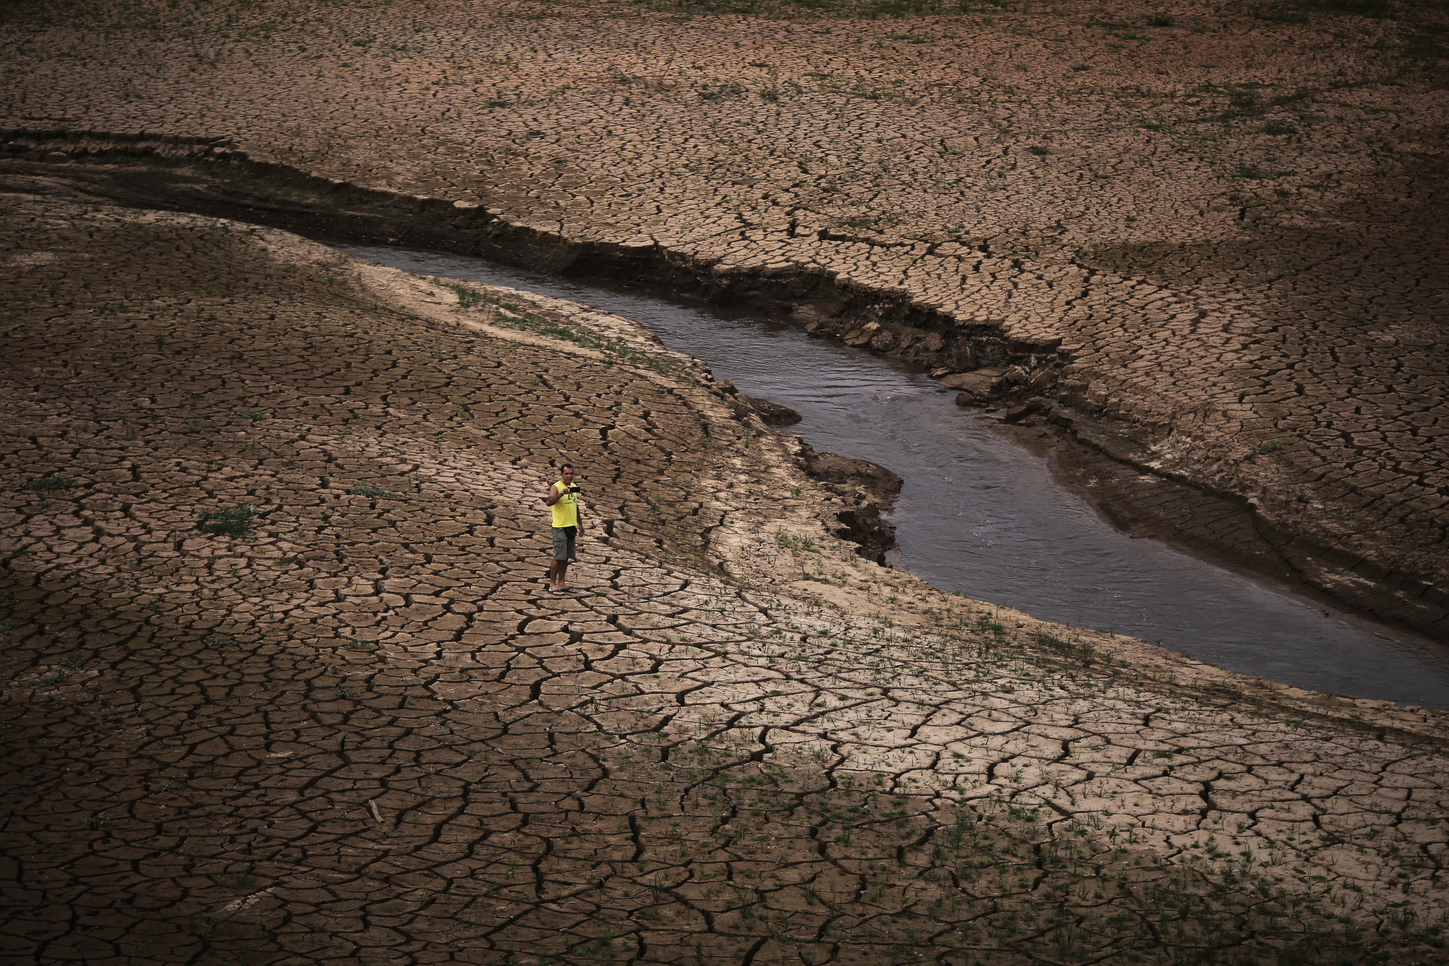 Global drought – how to react as an investor?